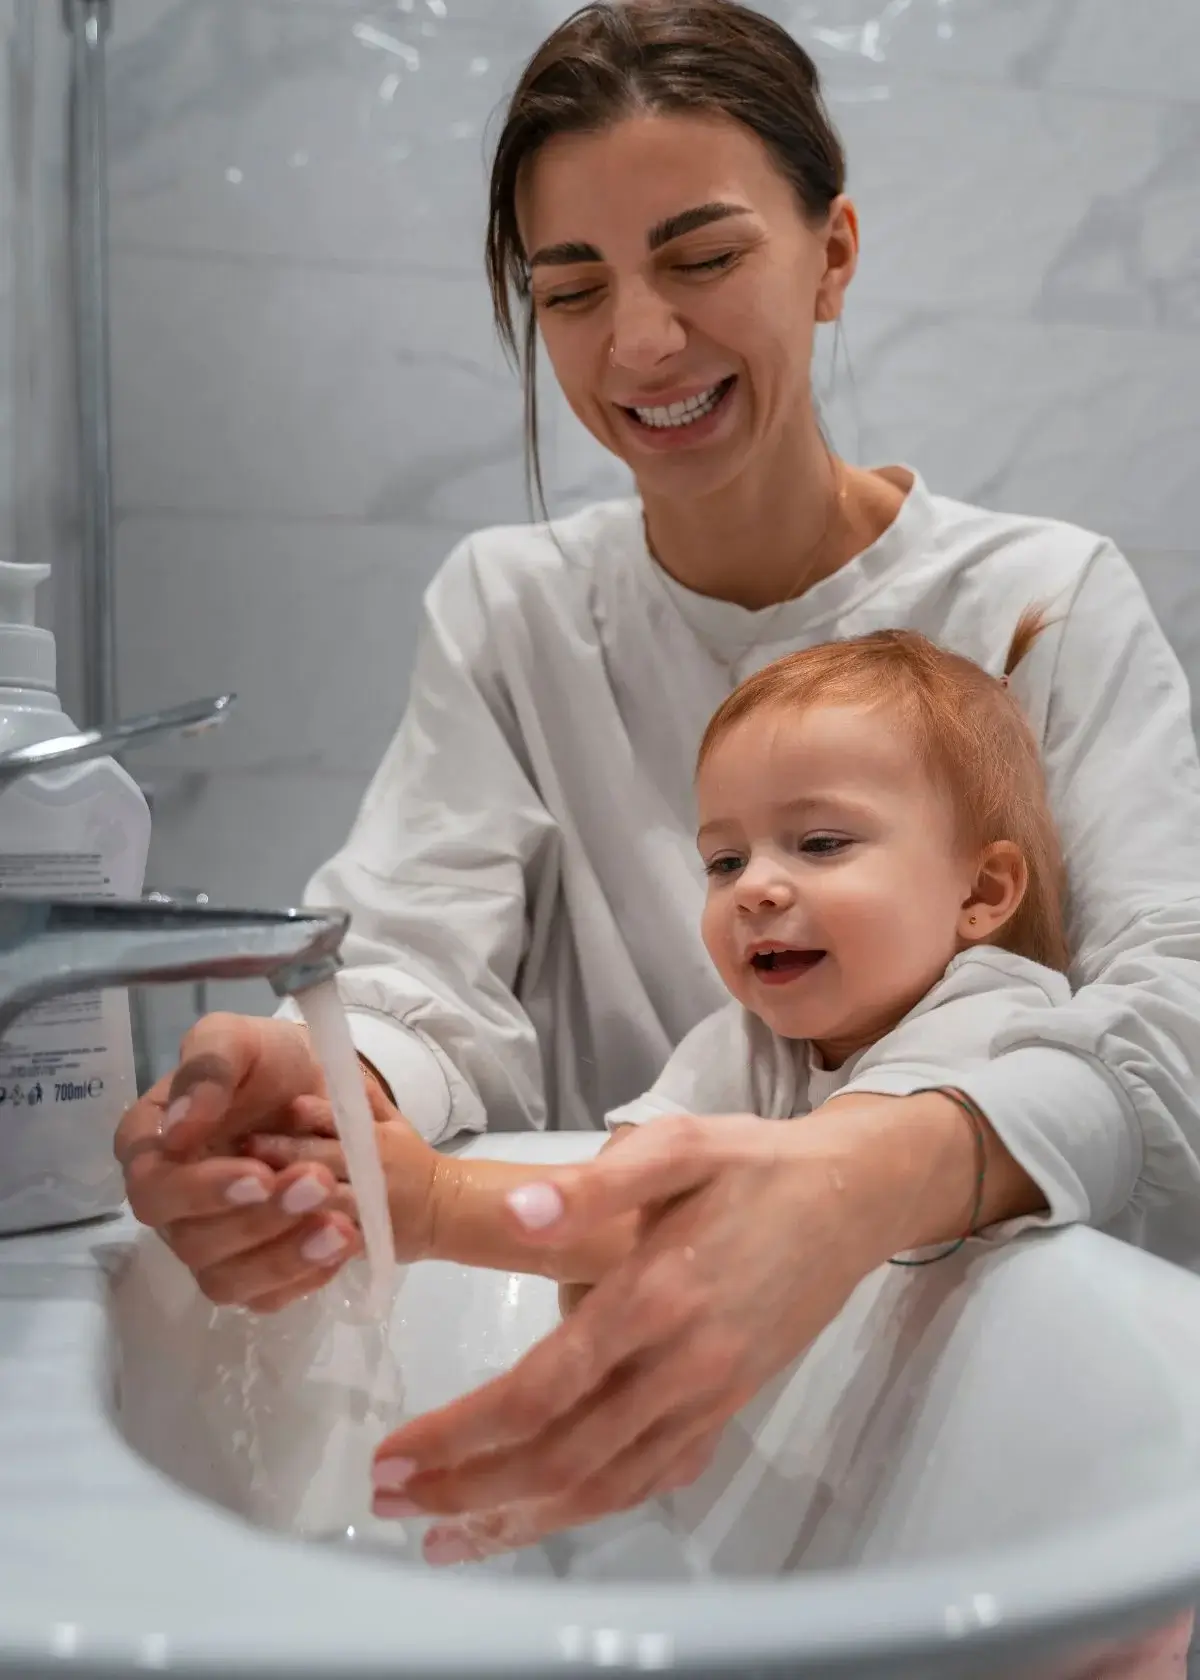 How to choose the right body wash for toddlers?